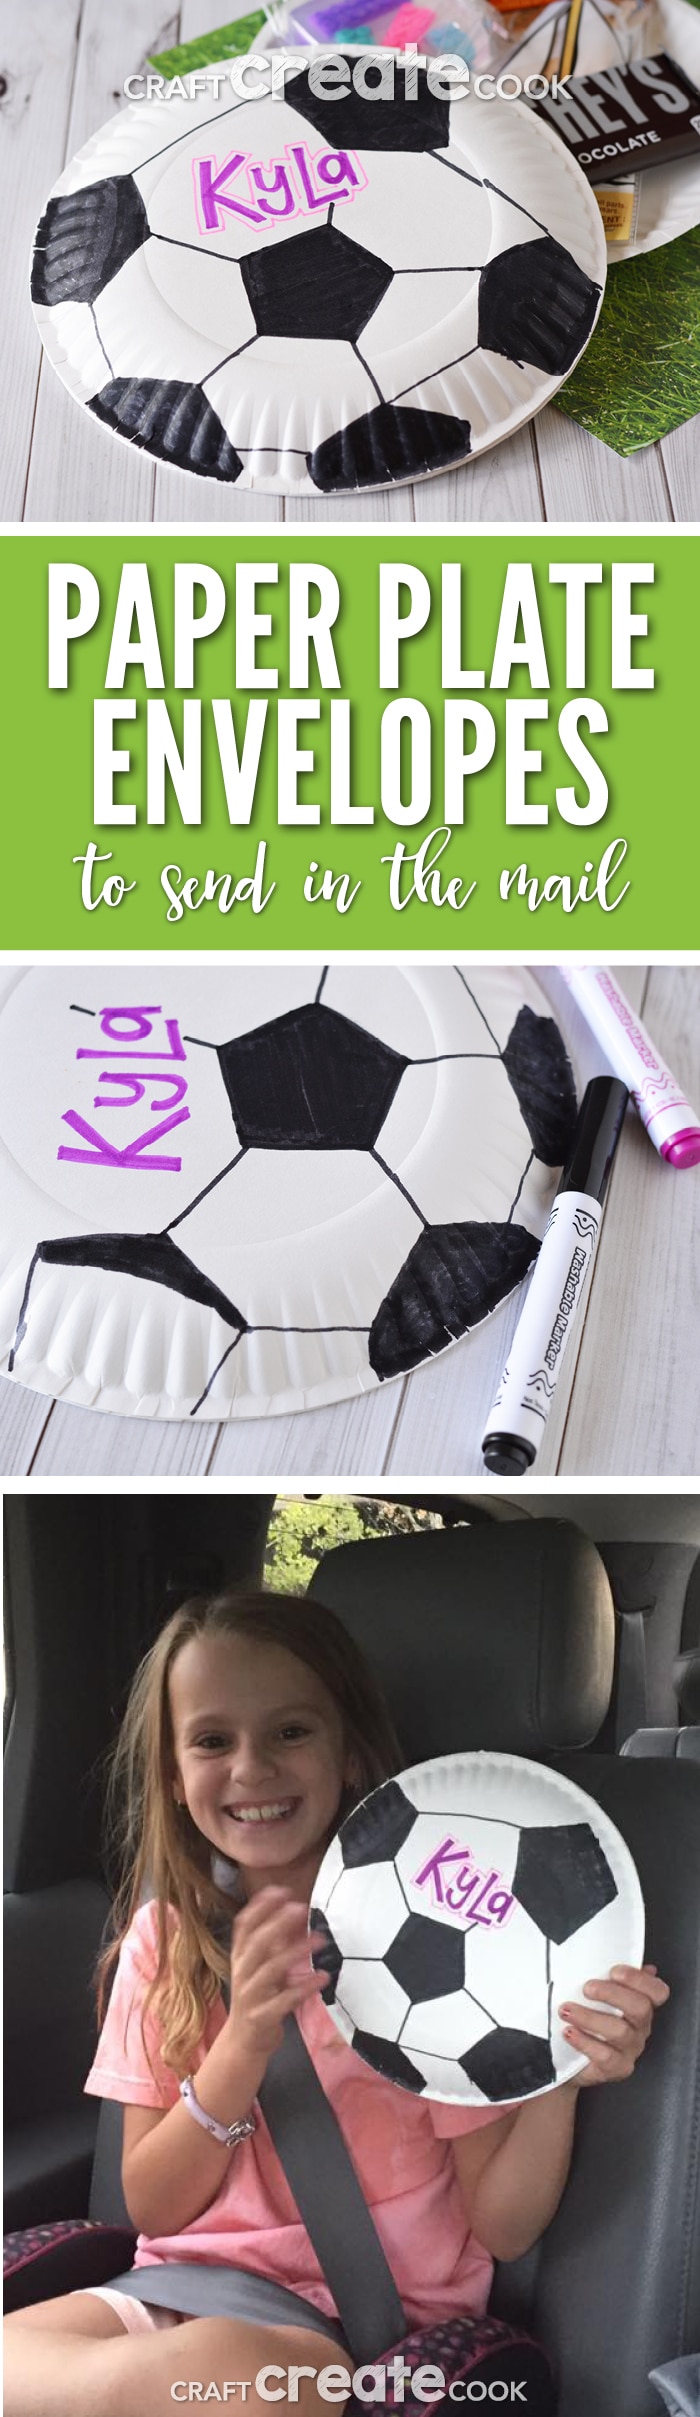 Sporty Paper Plate Envelopes - Craft Create Cook